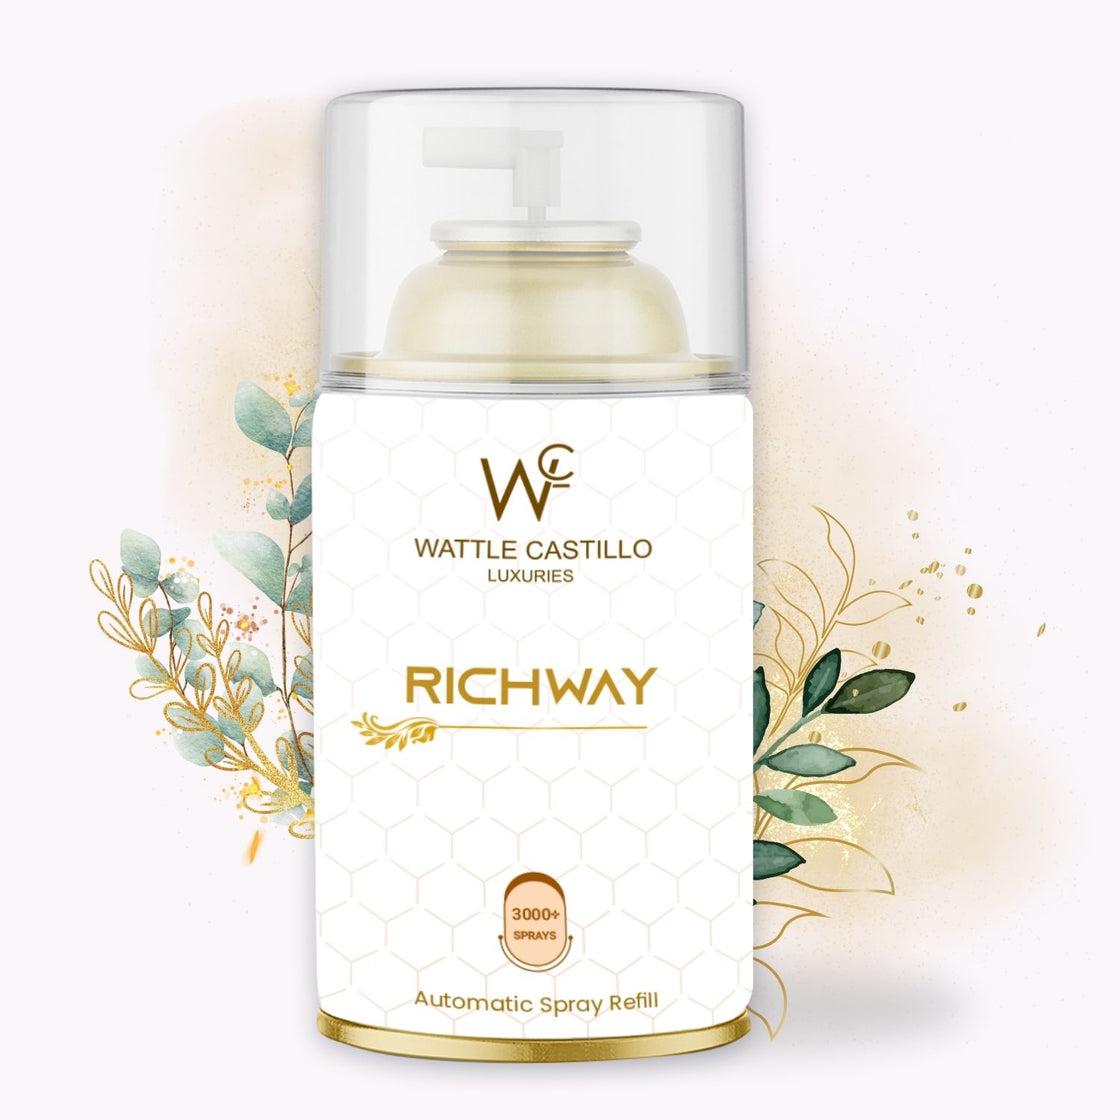 Wattle Richway Automatic Room Fresheners Refill (265ml) & 3000+ Sprays Guaranteed Lasts up to 80 days